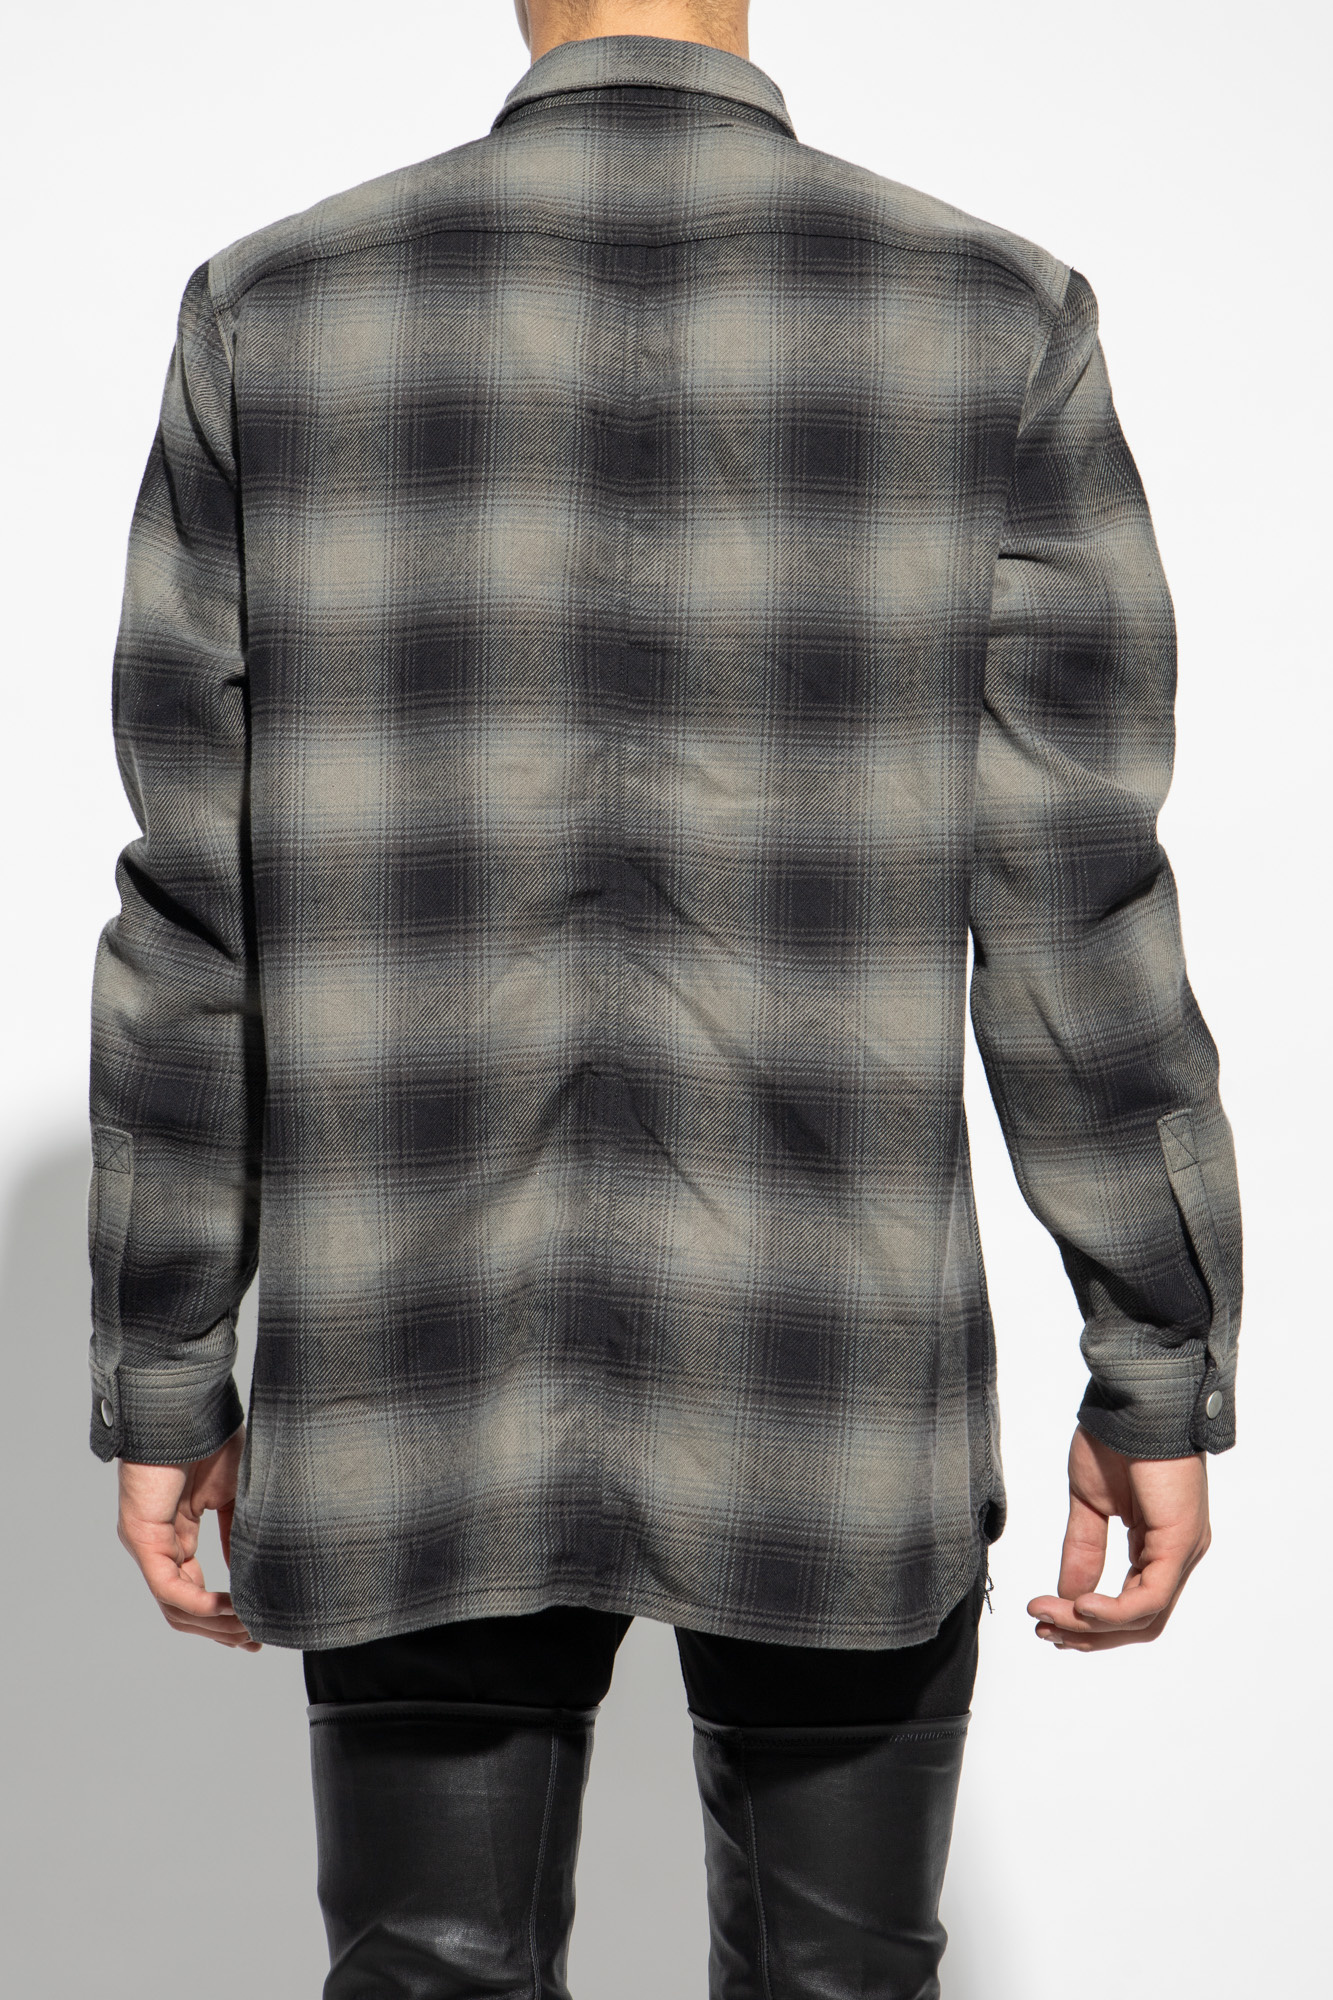 Rick Owens DRKSHDW 'Outershirt' checked shirt | Men's Clothing